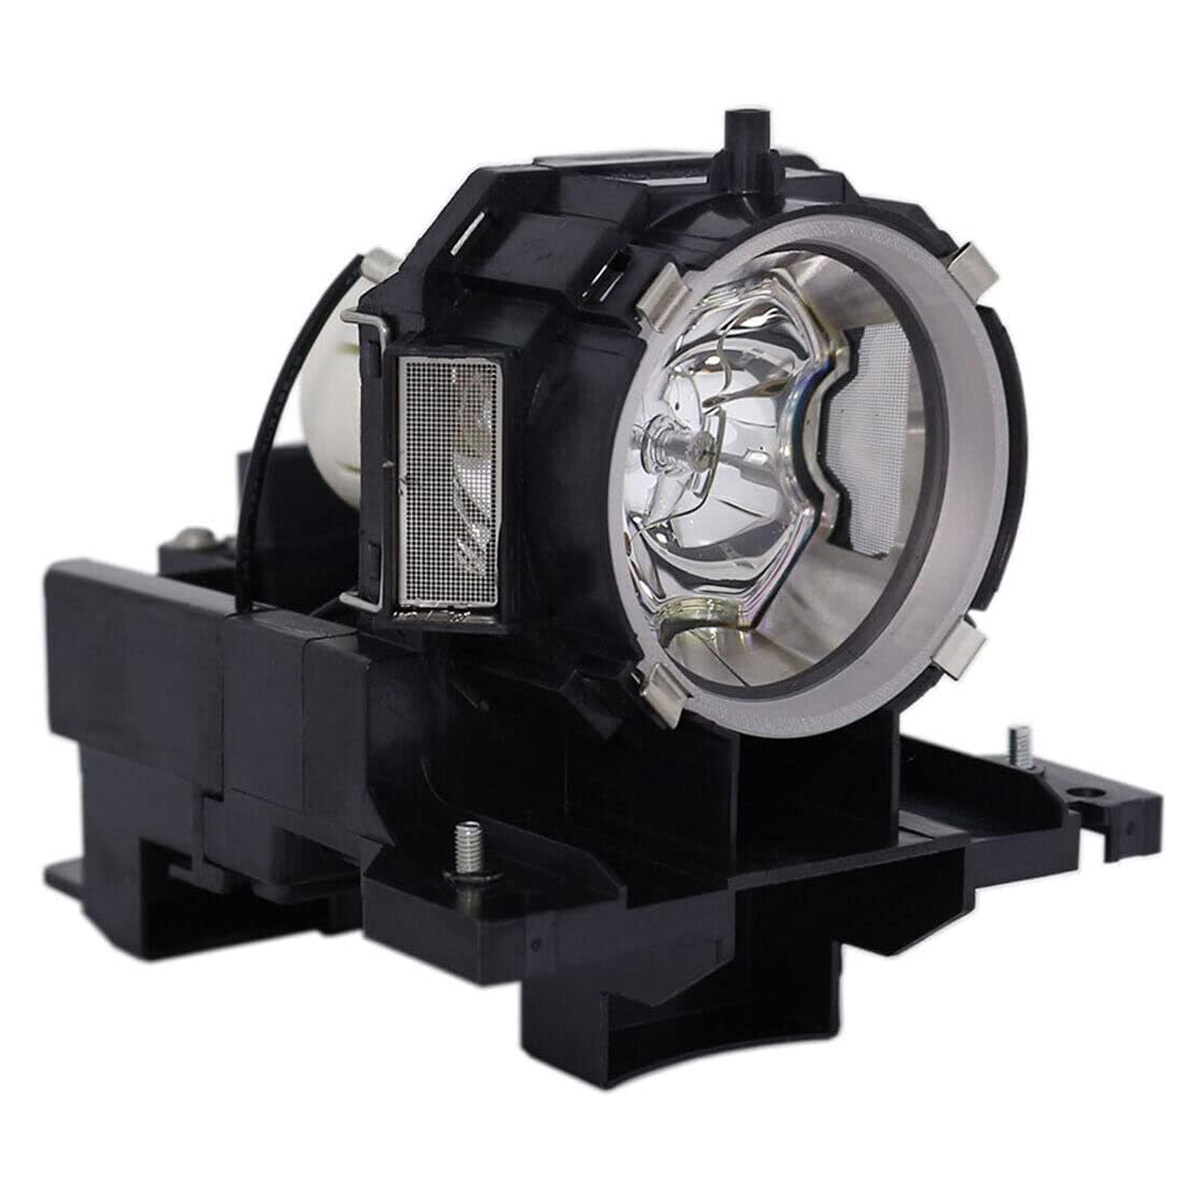 Replacement Projector lamp DT00871 For Hitachi CP-X615 CP-X705 CP -X807